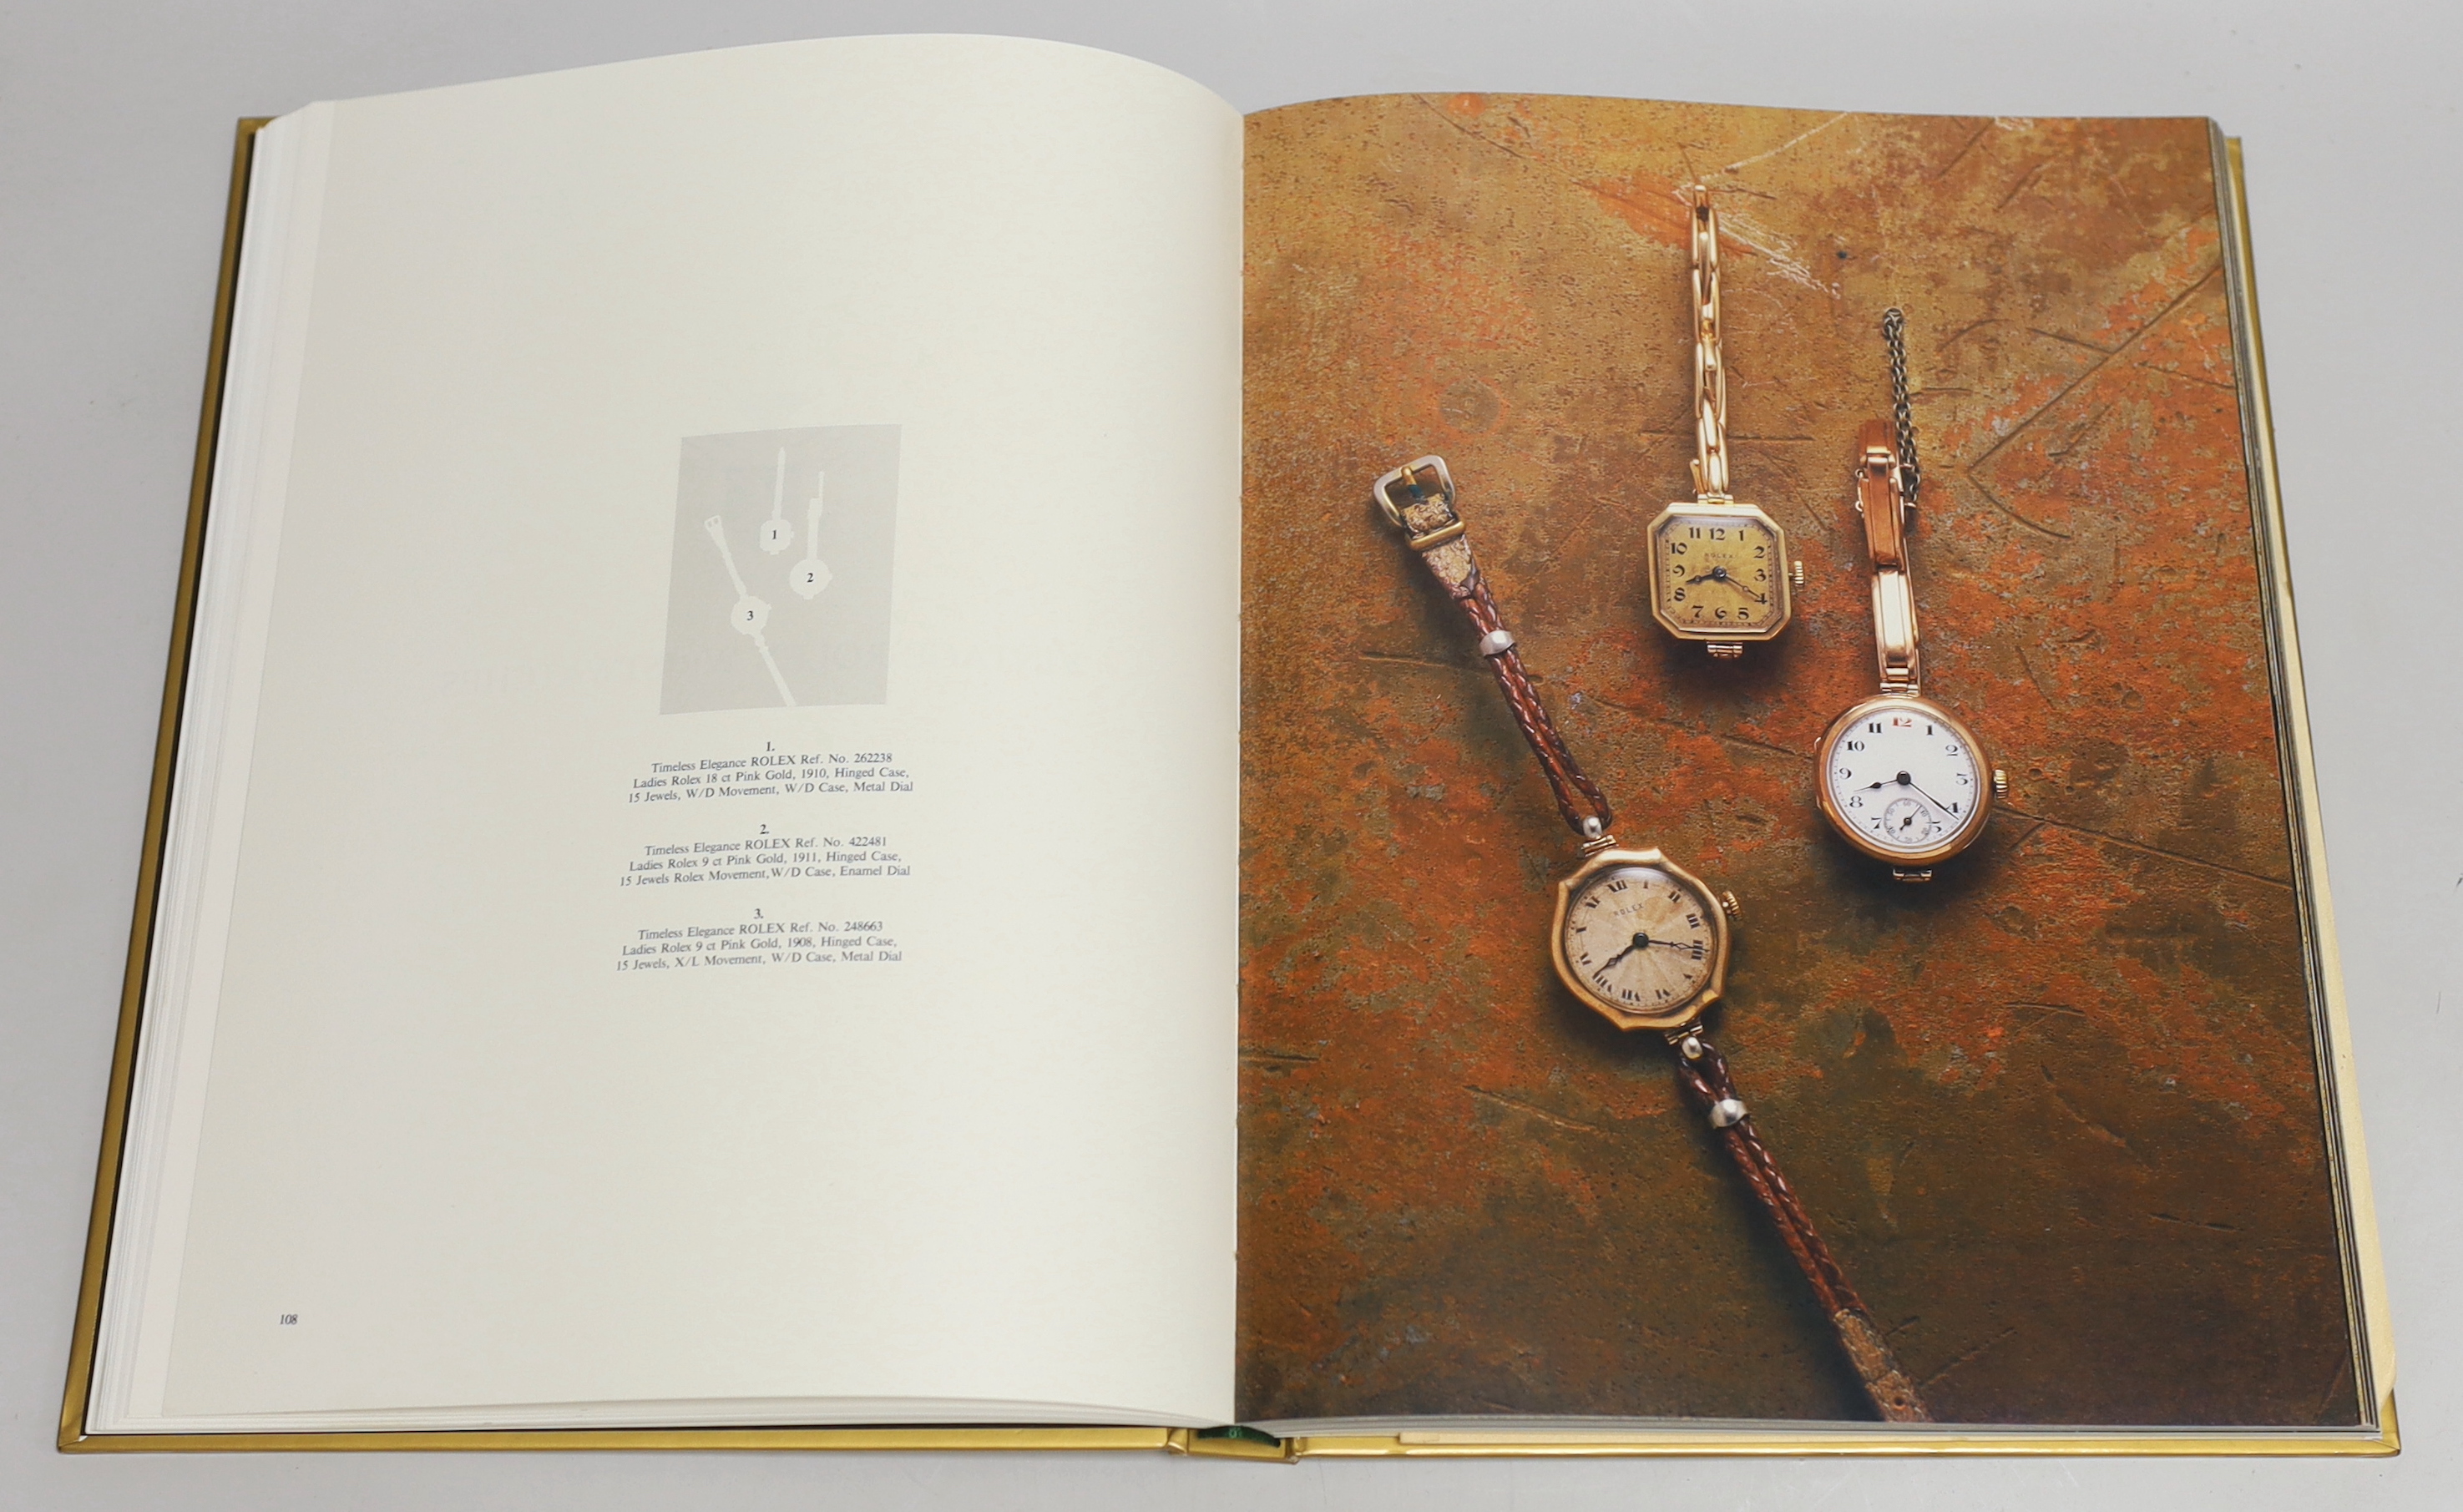 Rolex- Hans Wilsdorf and the Evolution of Time, by George Gordon.